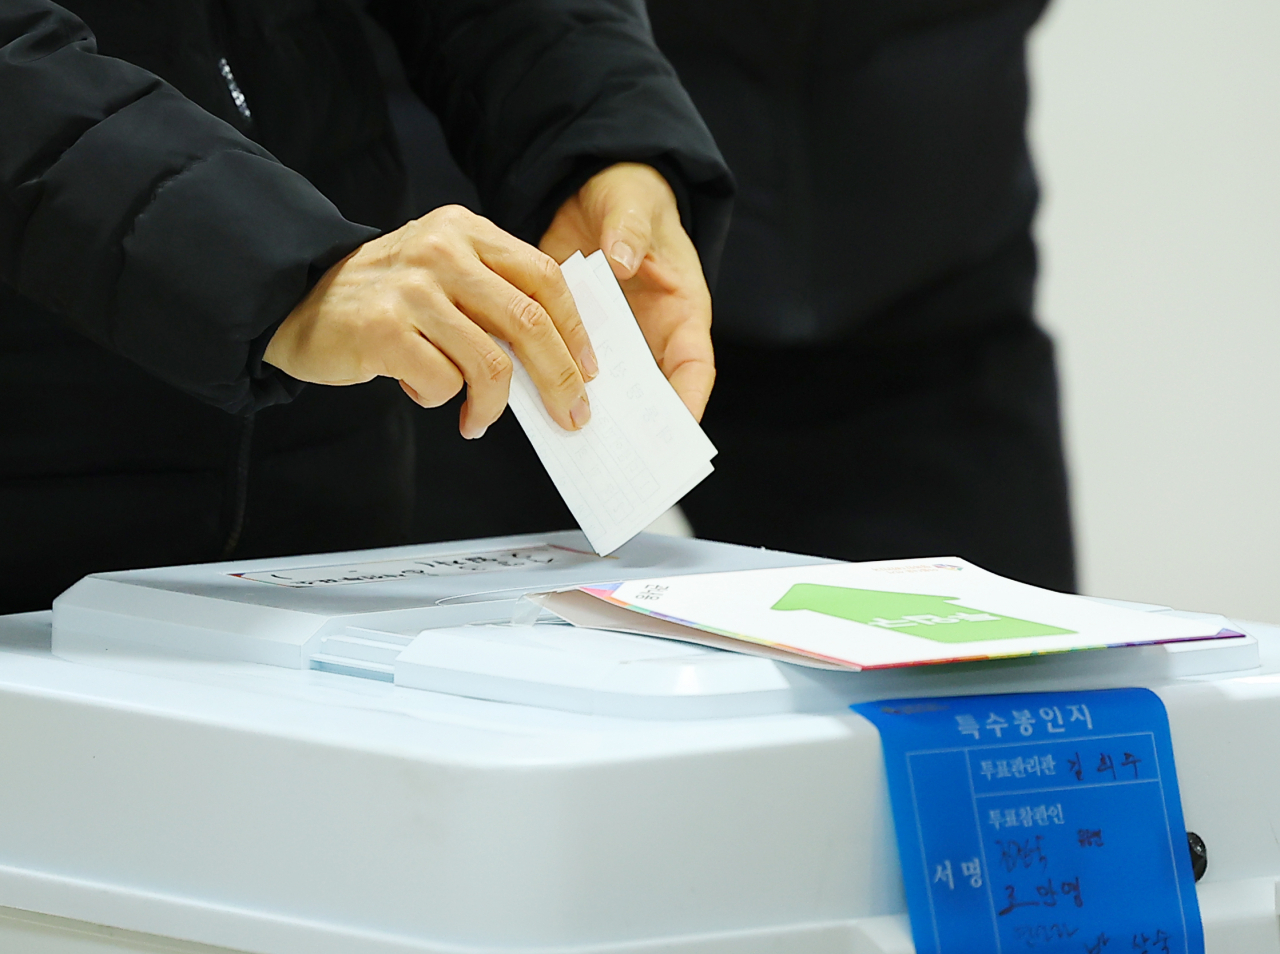 This file photo, taken last Saturday, shows a person casting a ballot at a polling station in eastern Seoul during early voting for South Korea's March 9 presidential election. (Yonhap)